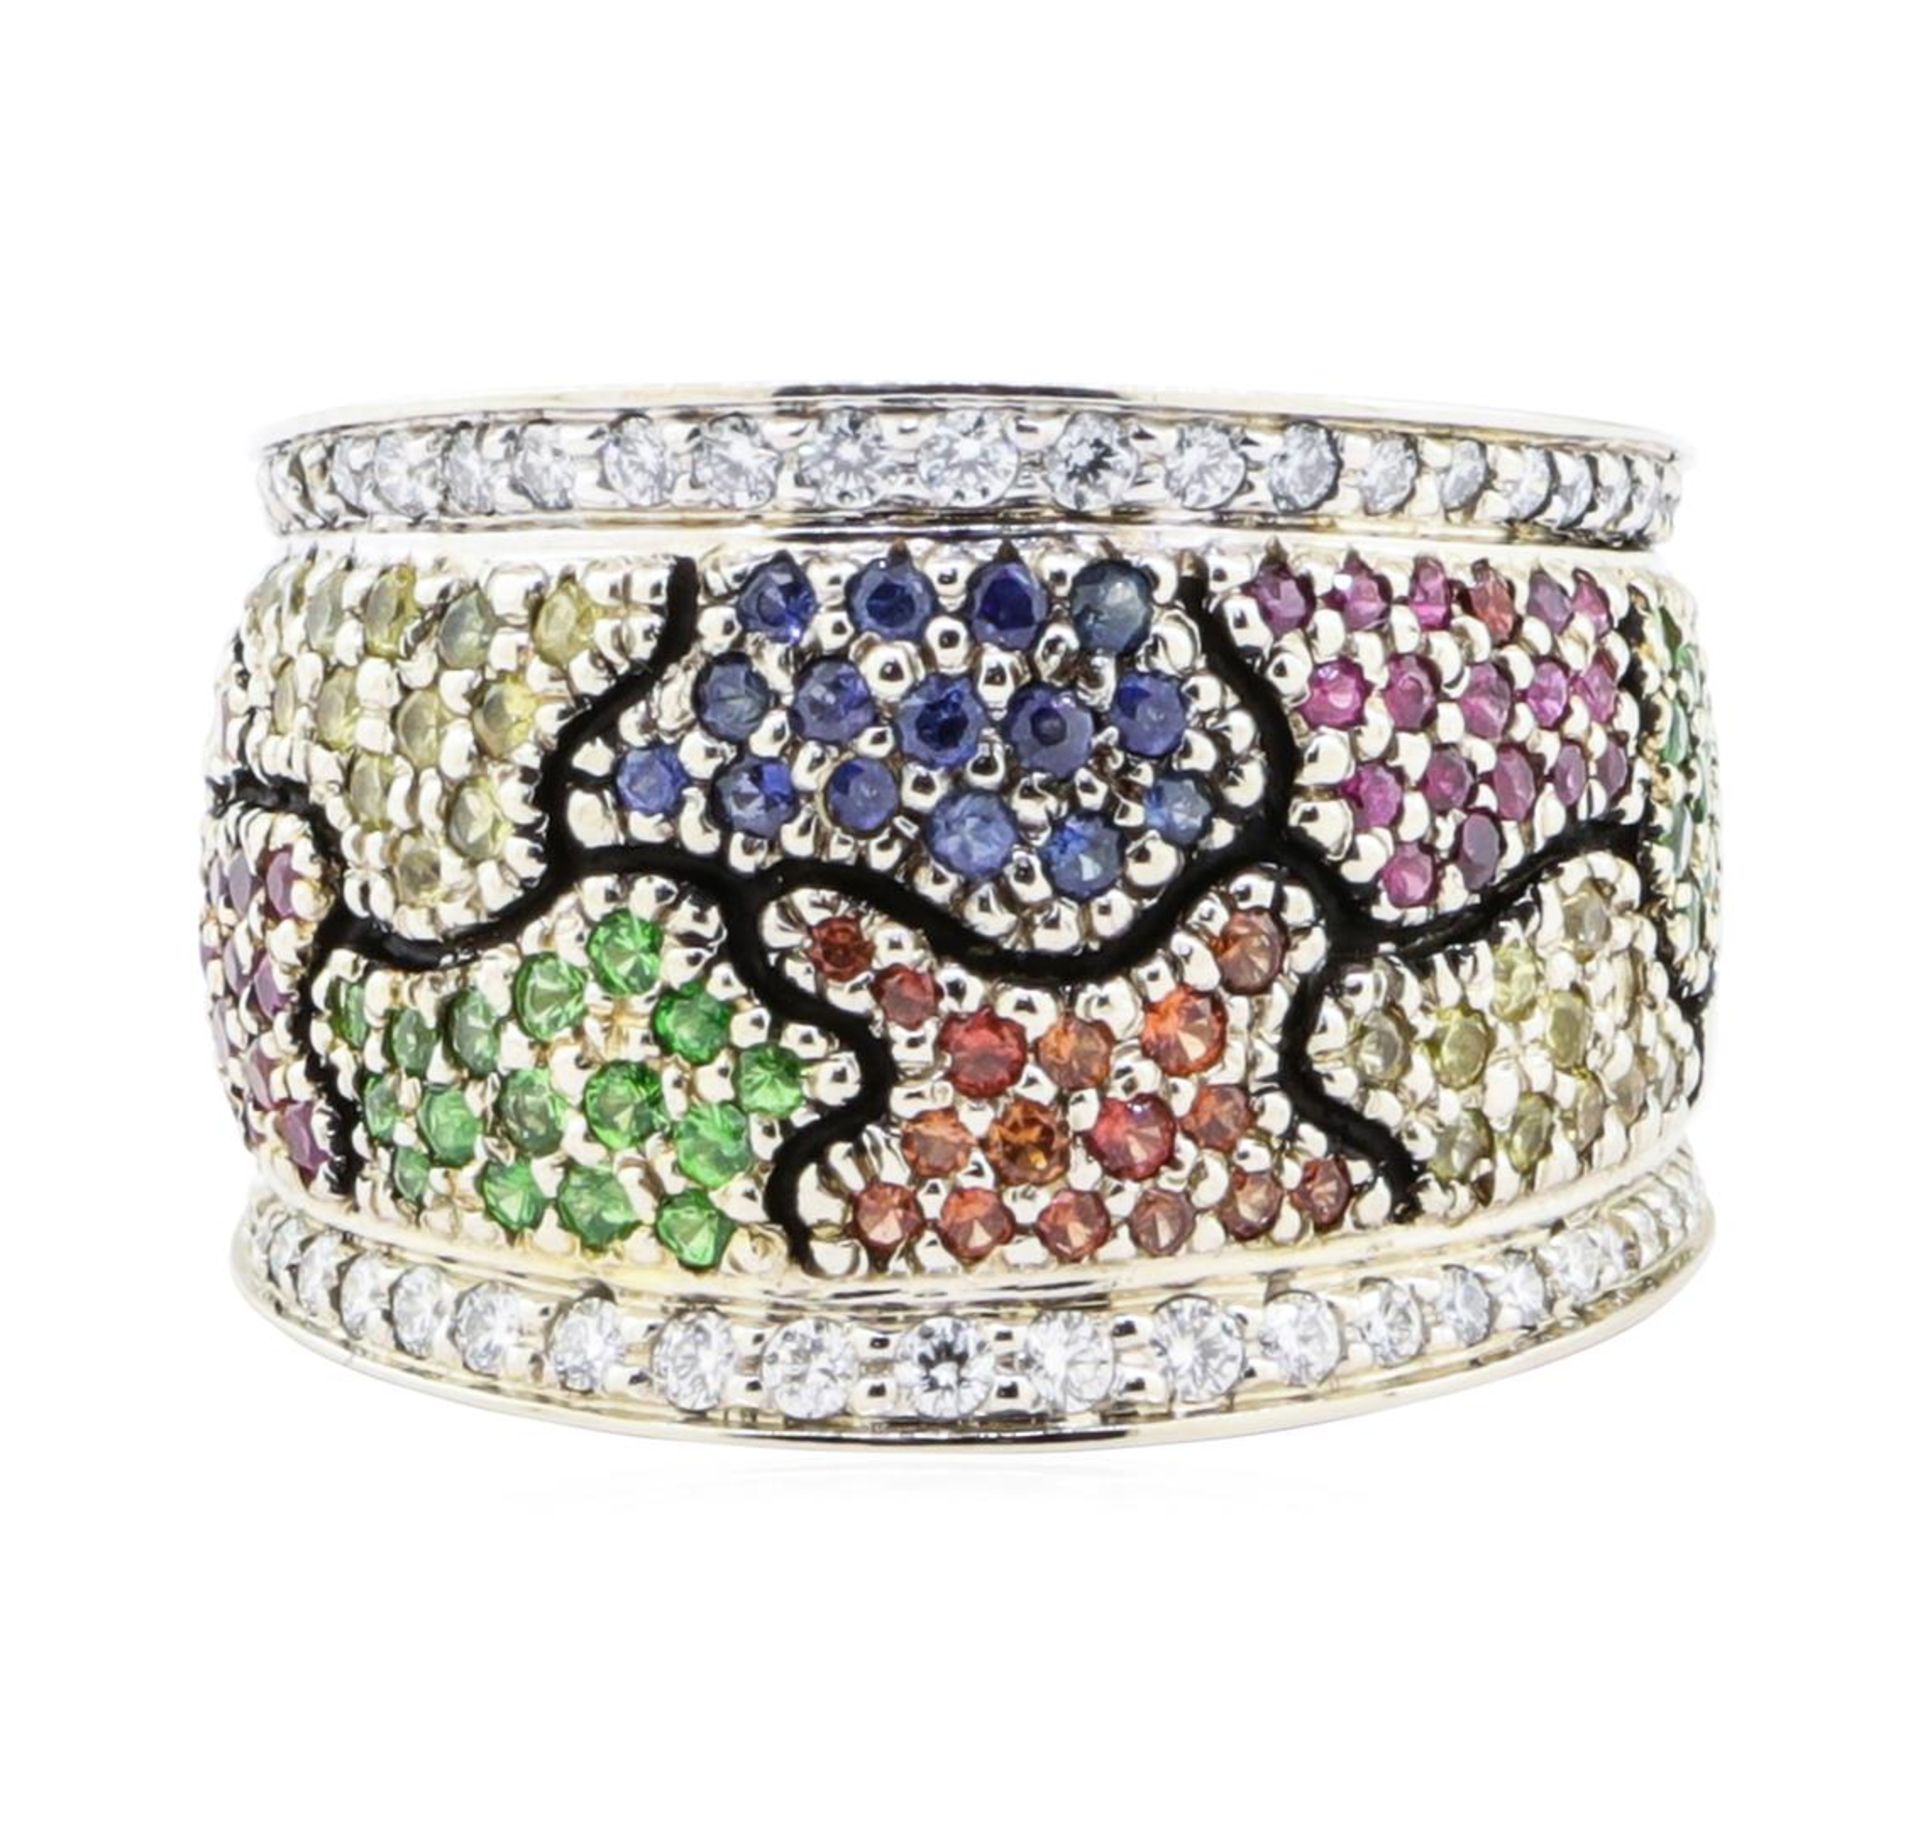 1.64 ctw Multi-colored Gemstone and Diamond Wide Band - 18KT Yellow And White Go - Image 2 of 6